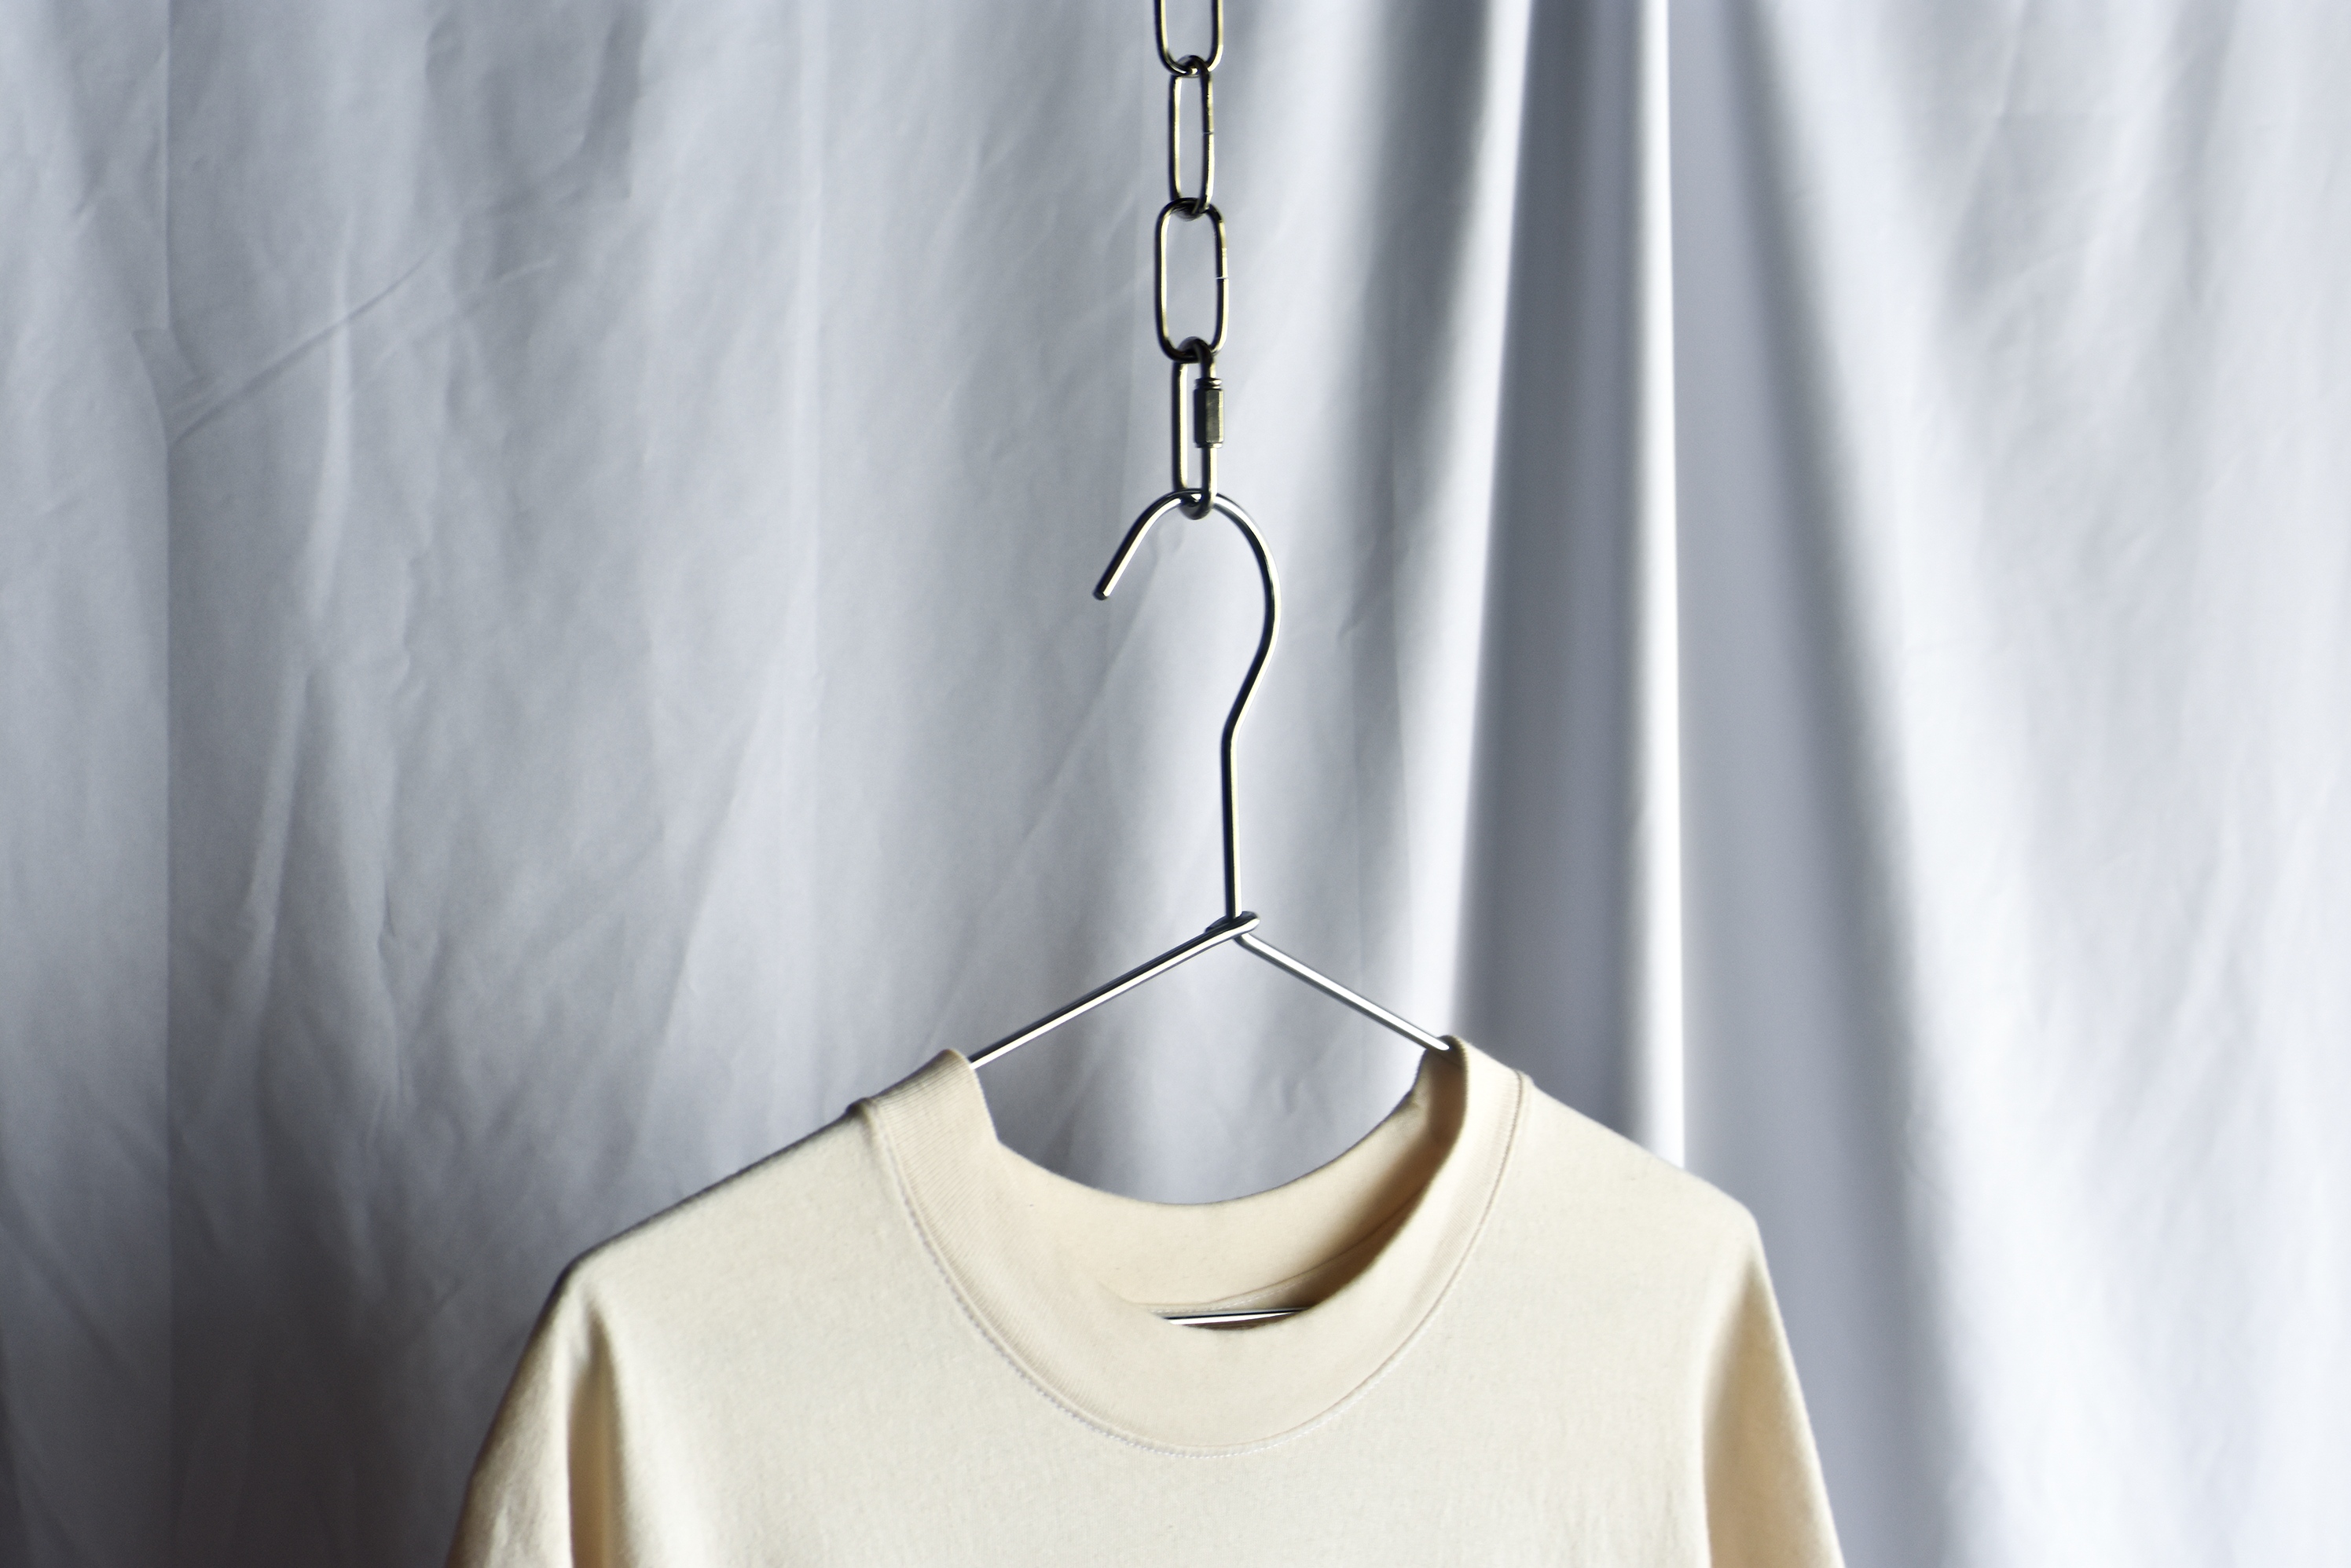 T-shirt Hanging on coat hanger from metal chain.